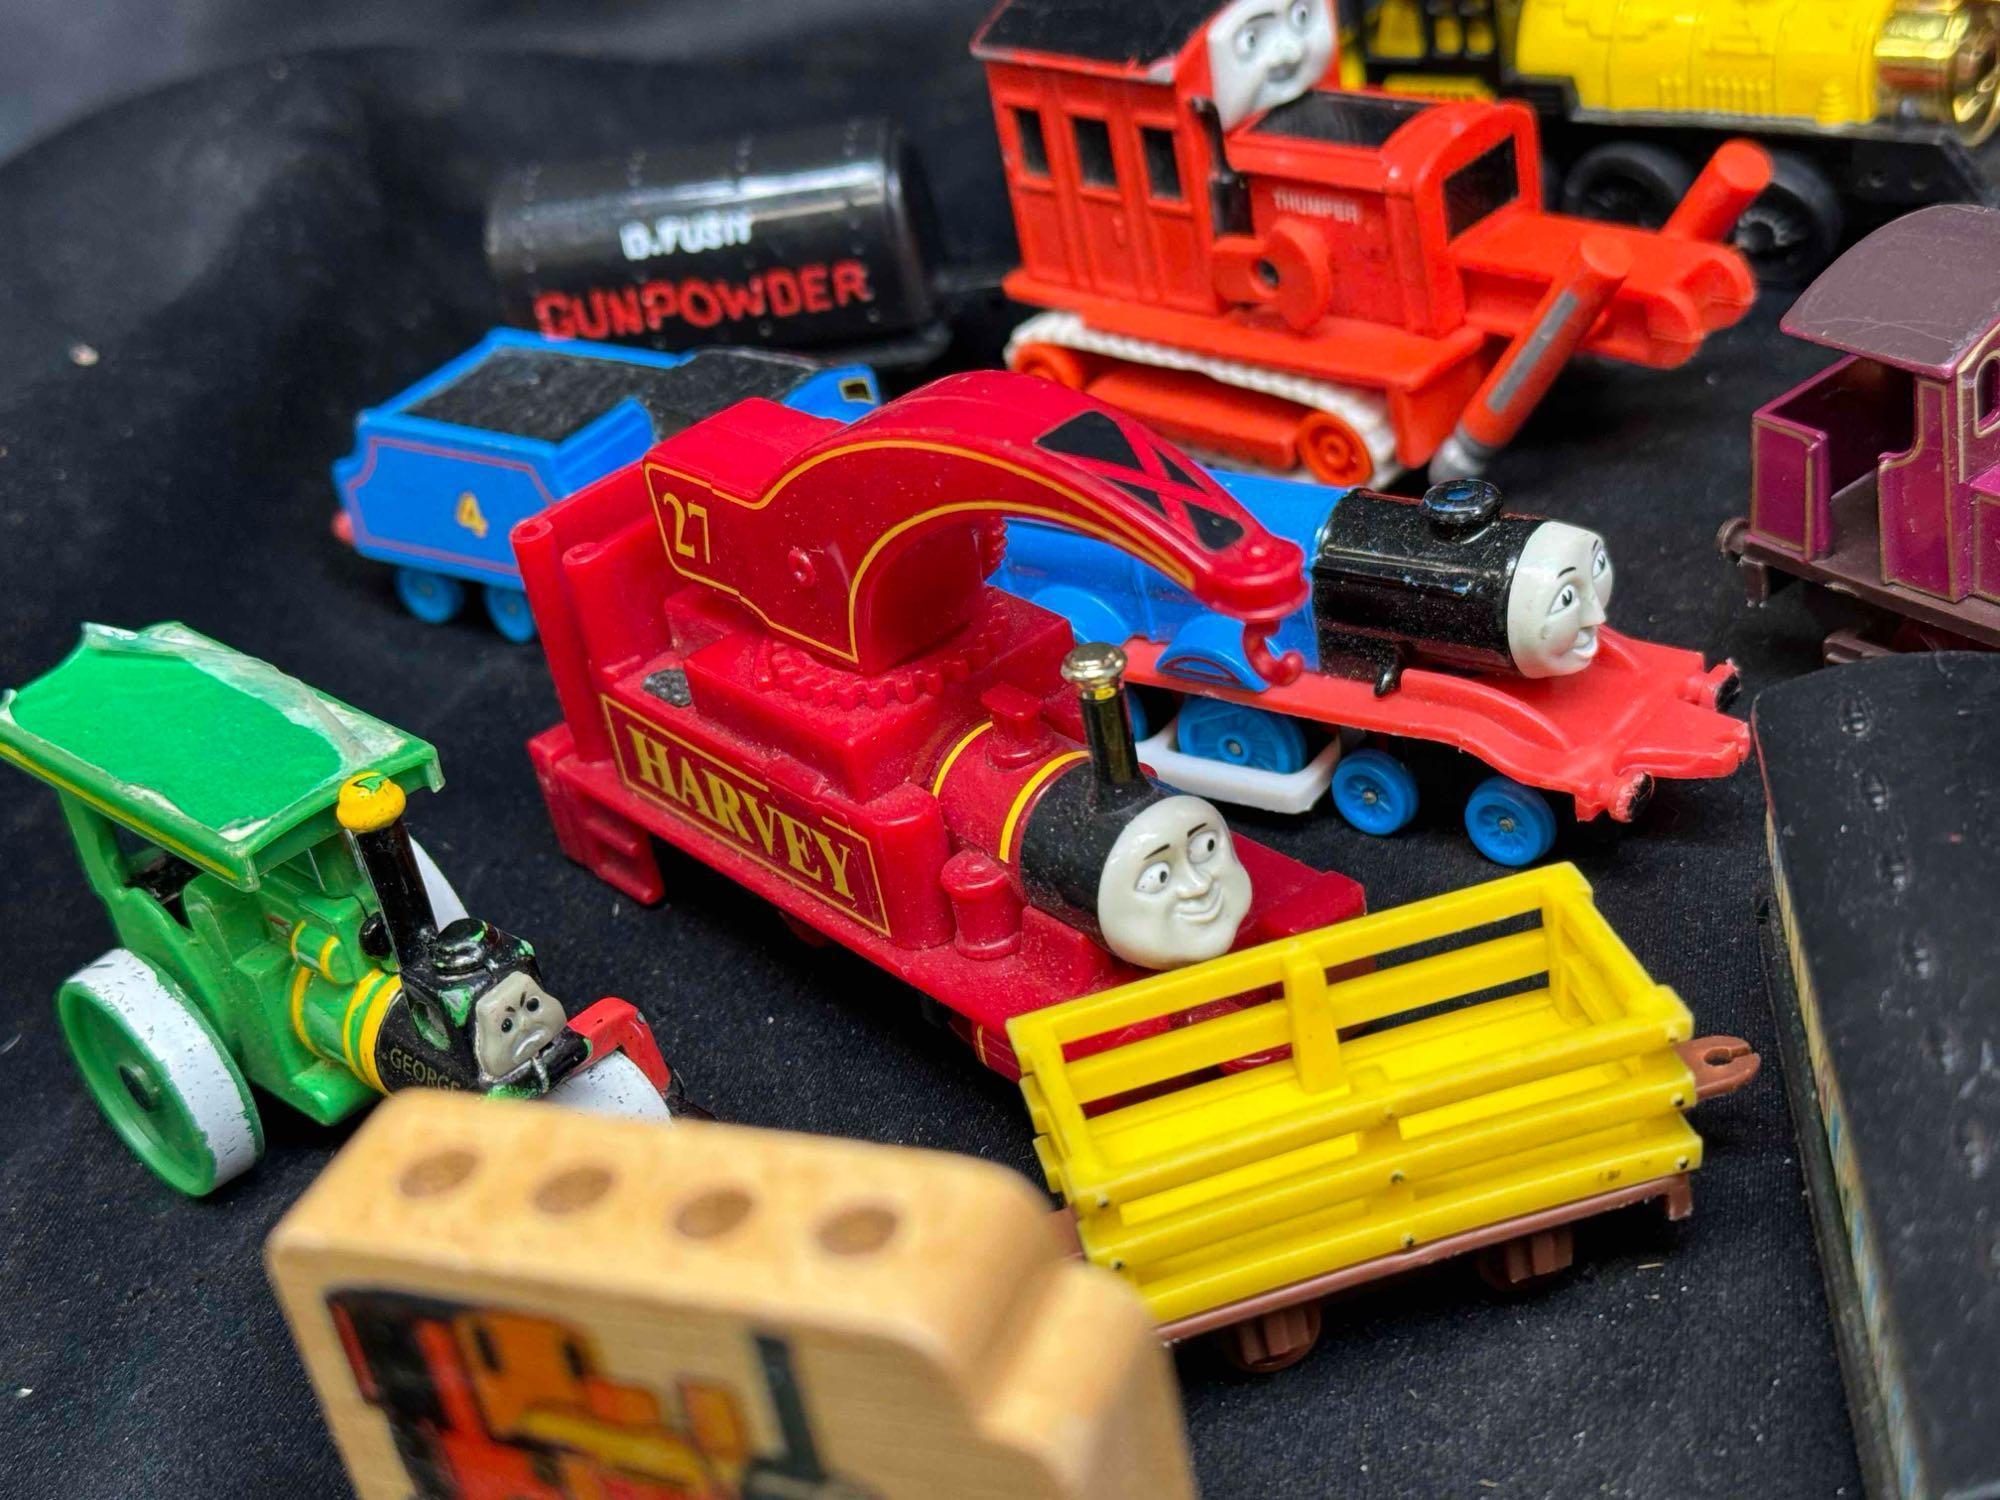 Thomas the Tank Engine and Toy Train accessories